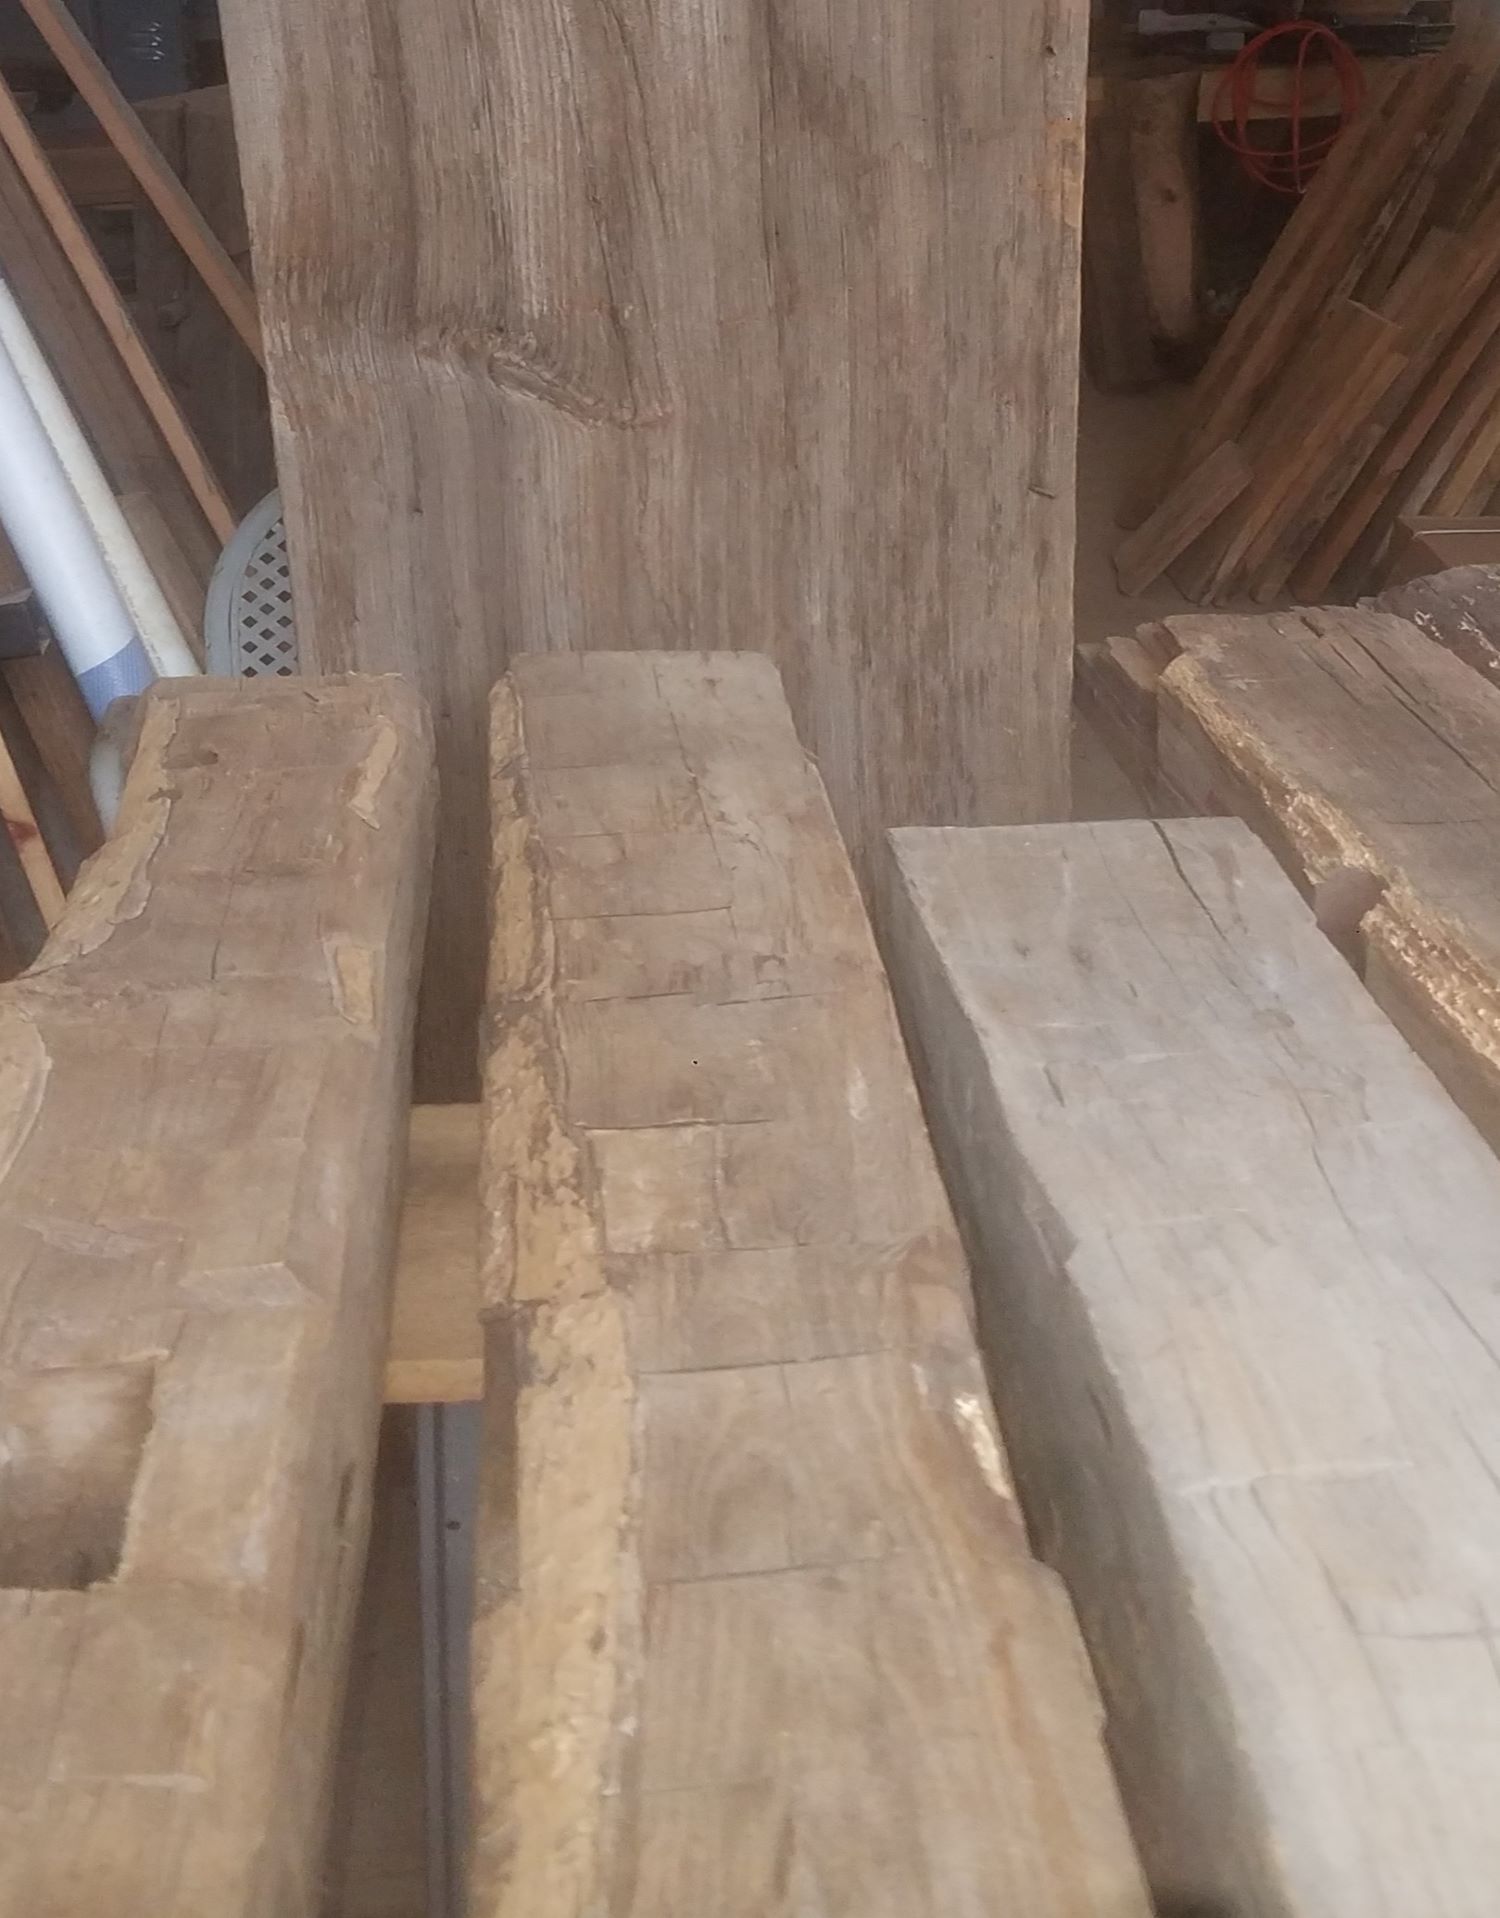 Hand hewn barn beams that will be used as rafters in a customer's home